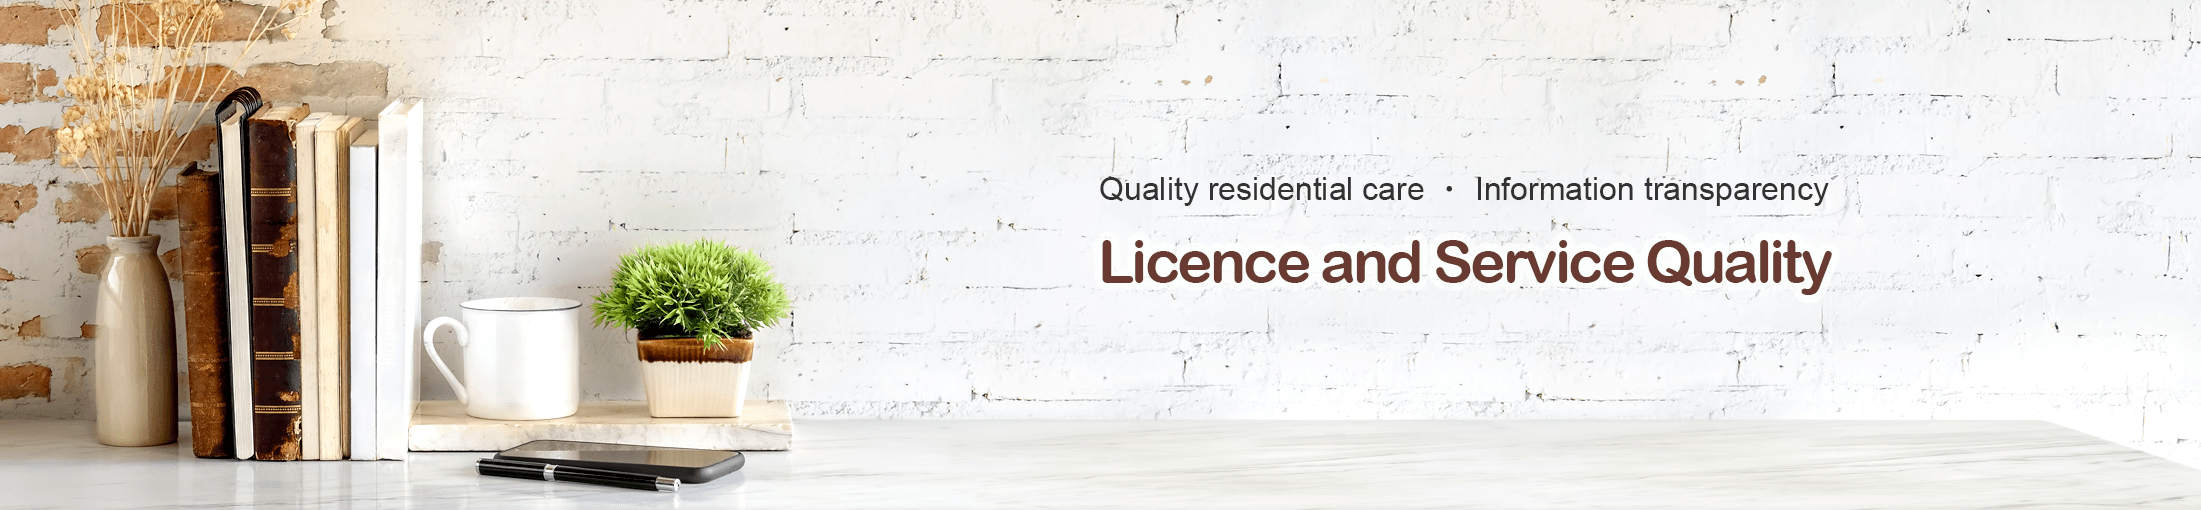 Licence and Service Quality